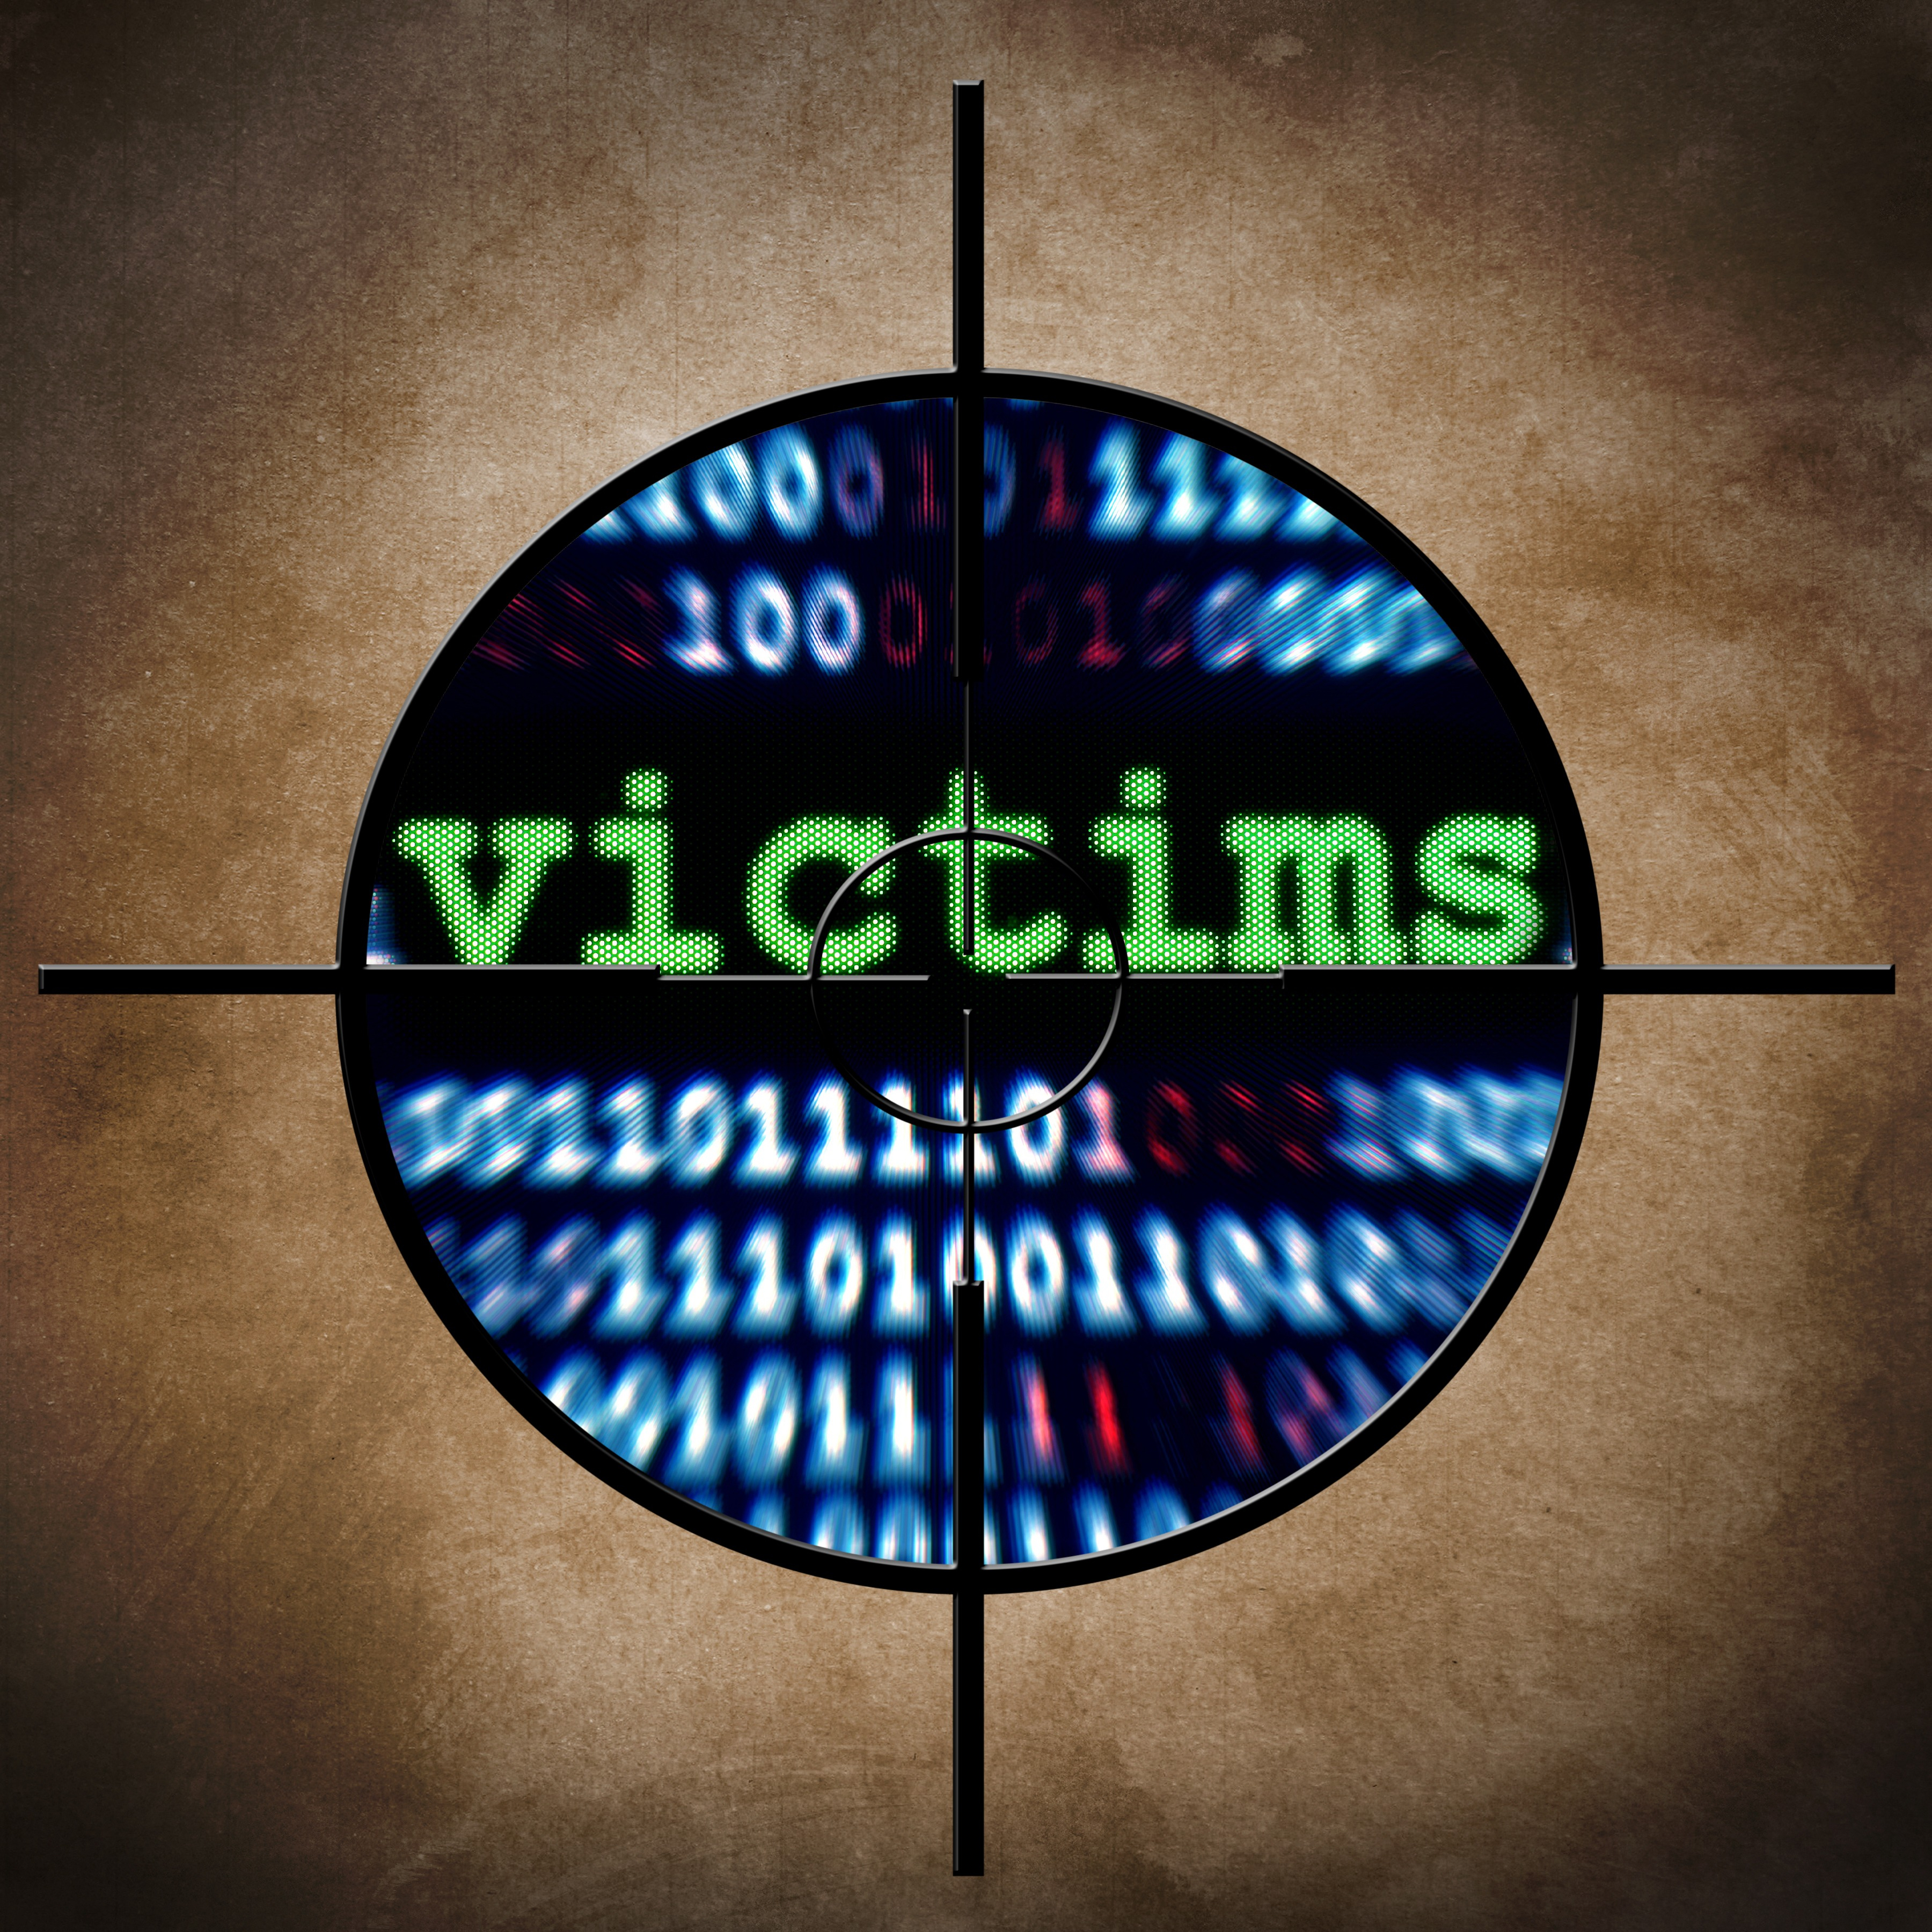 Victims target